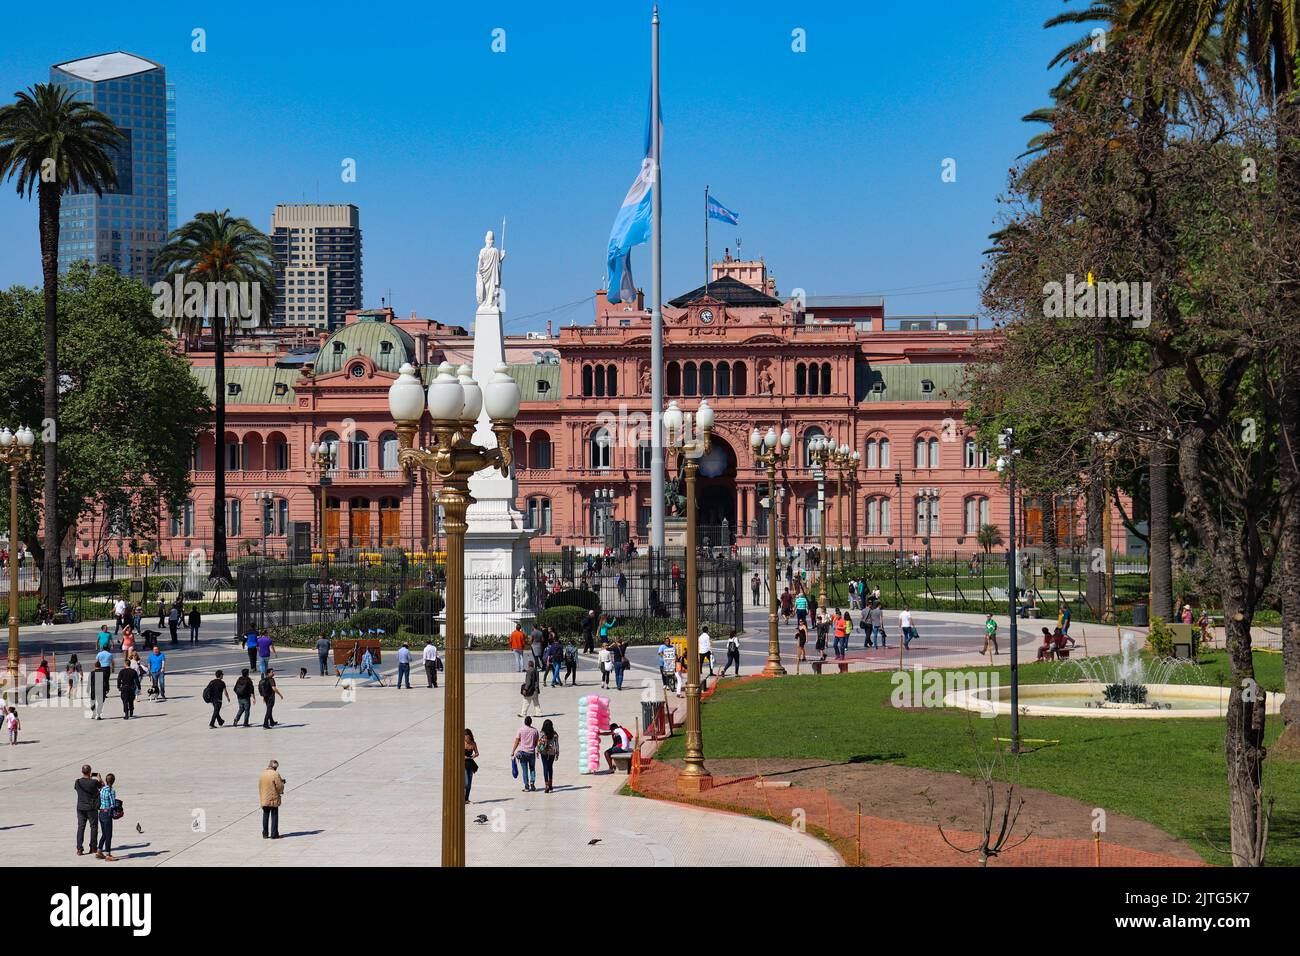 Casa Rosada seat of the government of the Argentine republic seen from the Plaza de Mayo Stock Photo